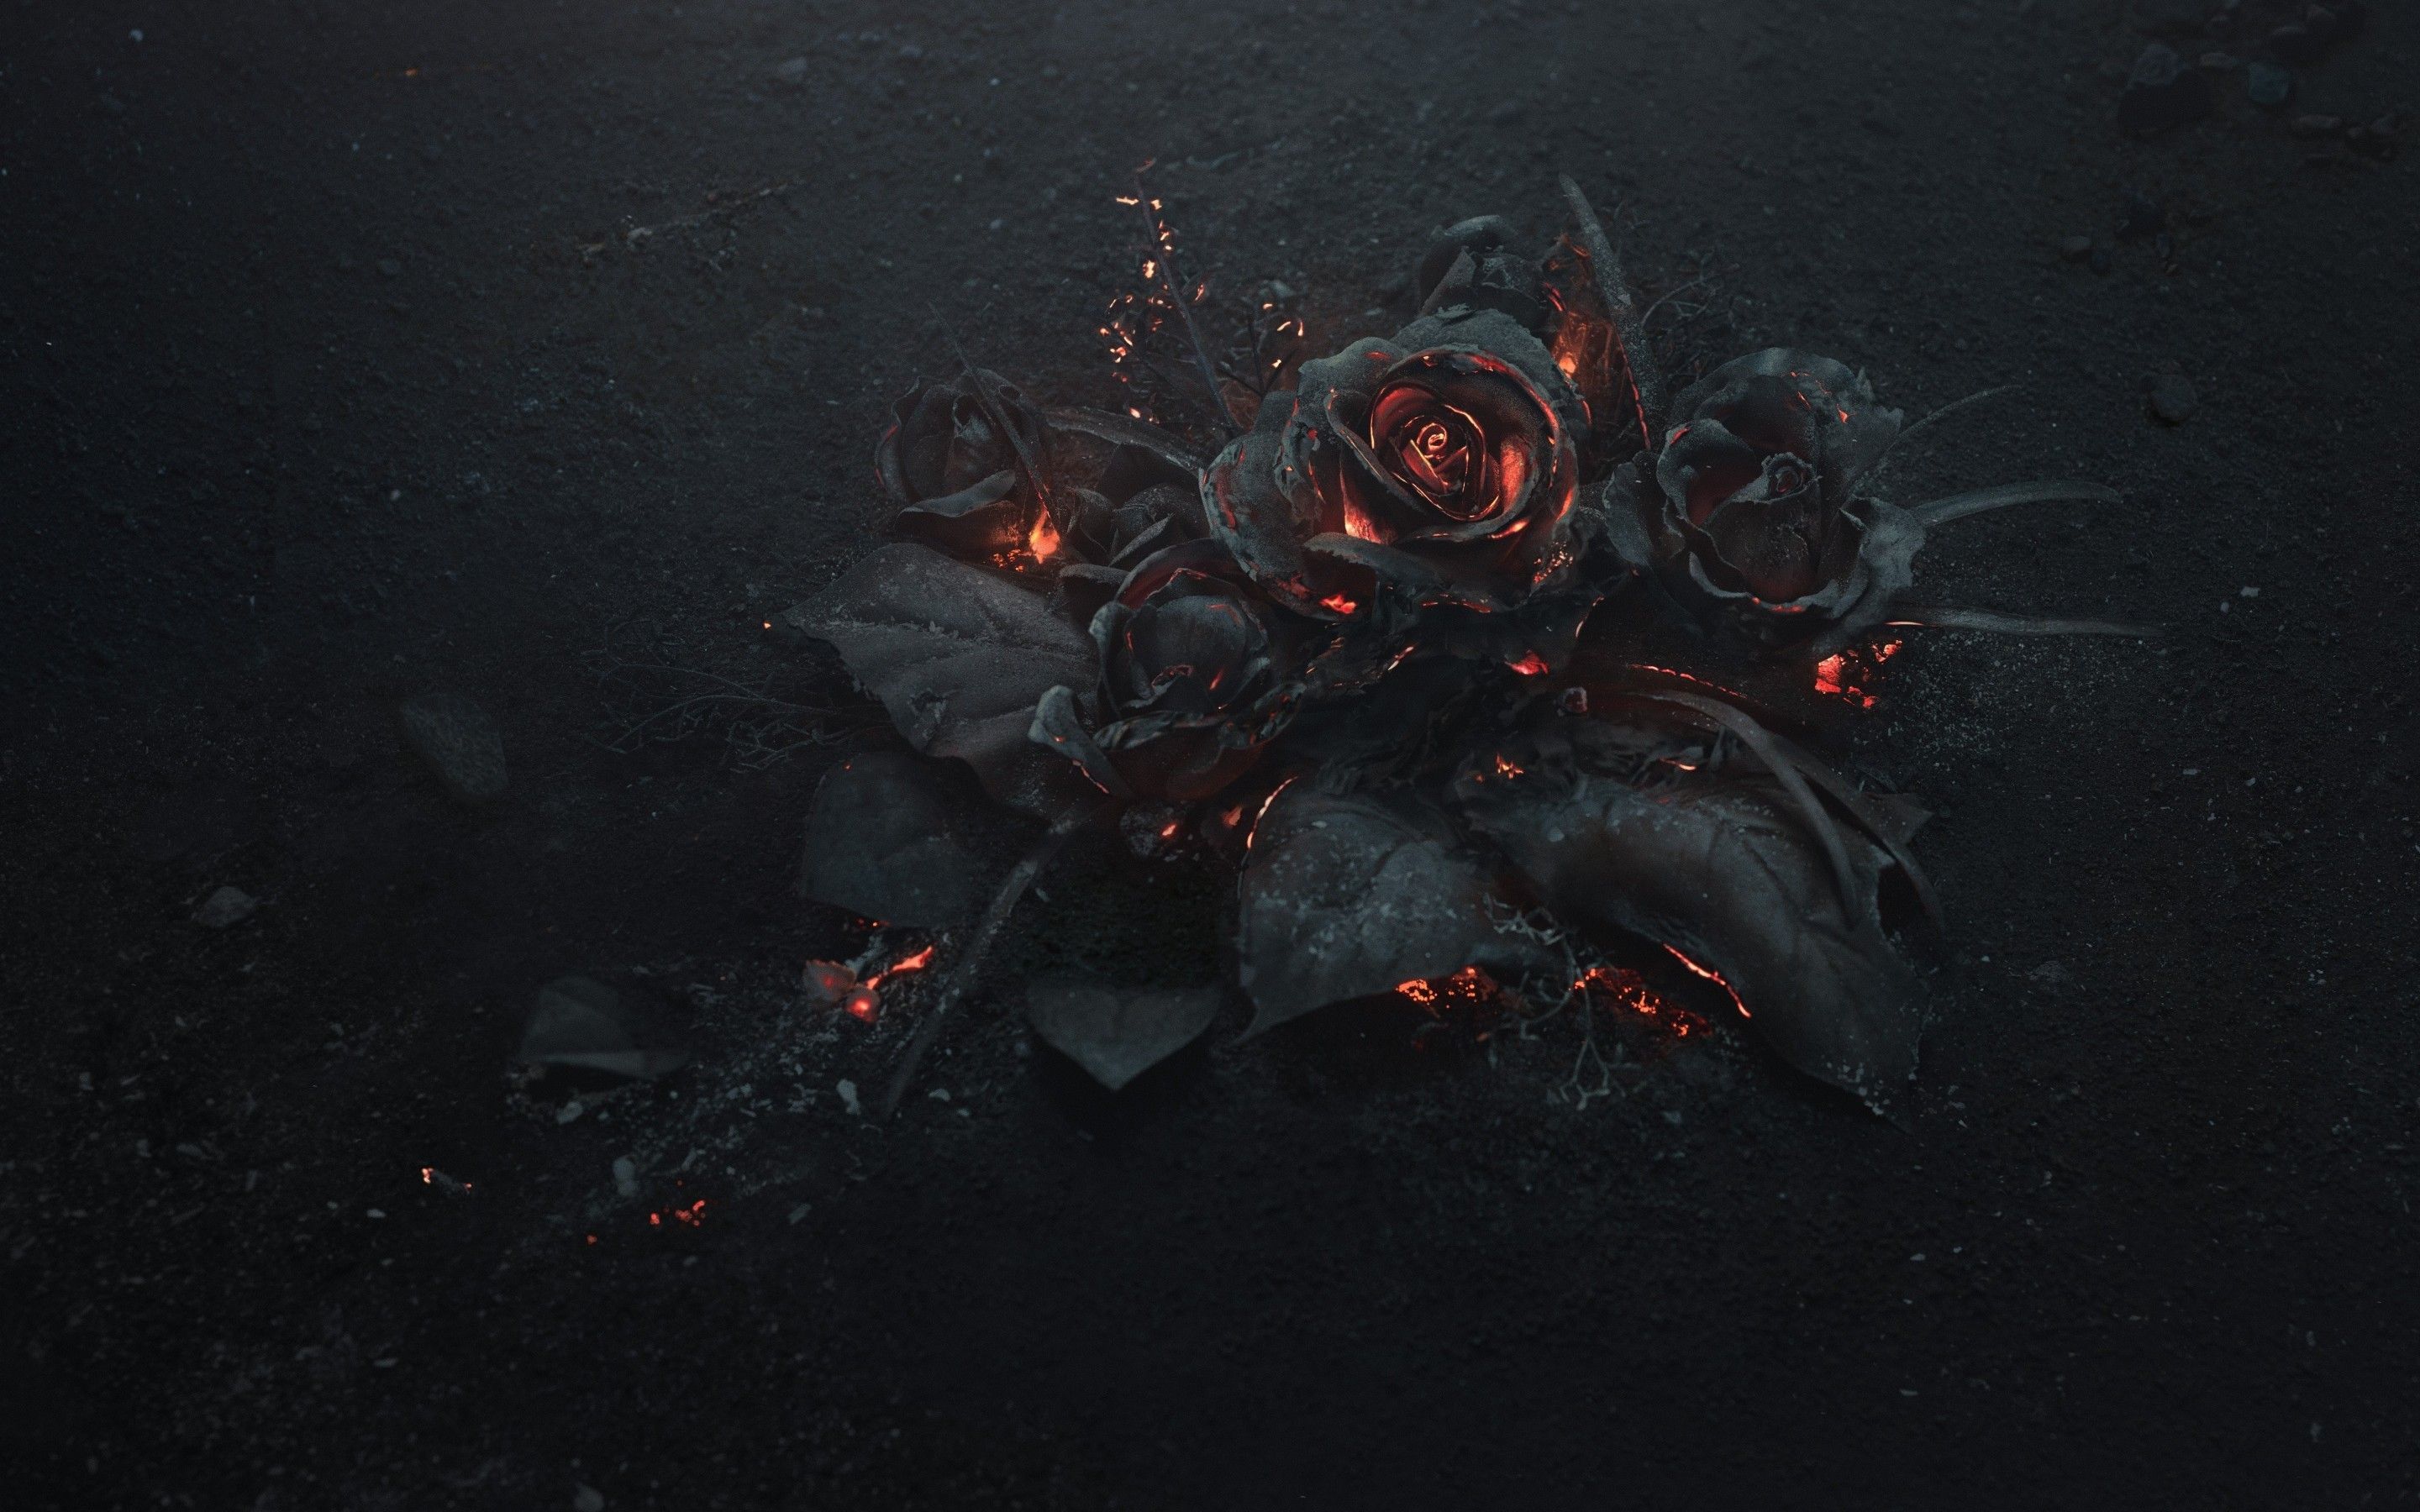 Download 2880x1800 Rose Ashes, Fire, Black, Dark Theme Wallpaper for MacBook Pro 15 inch